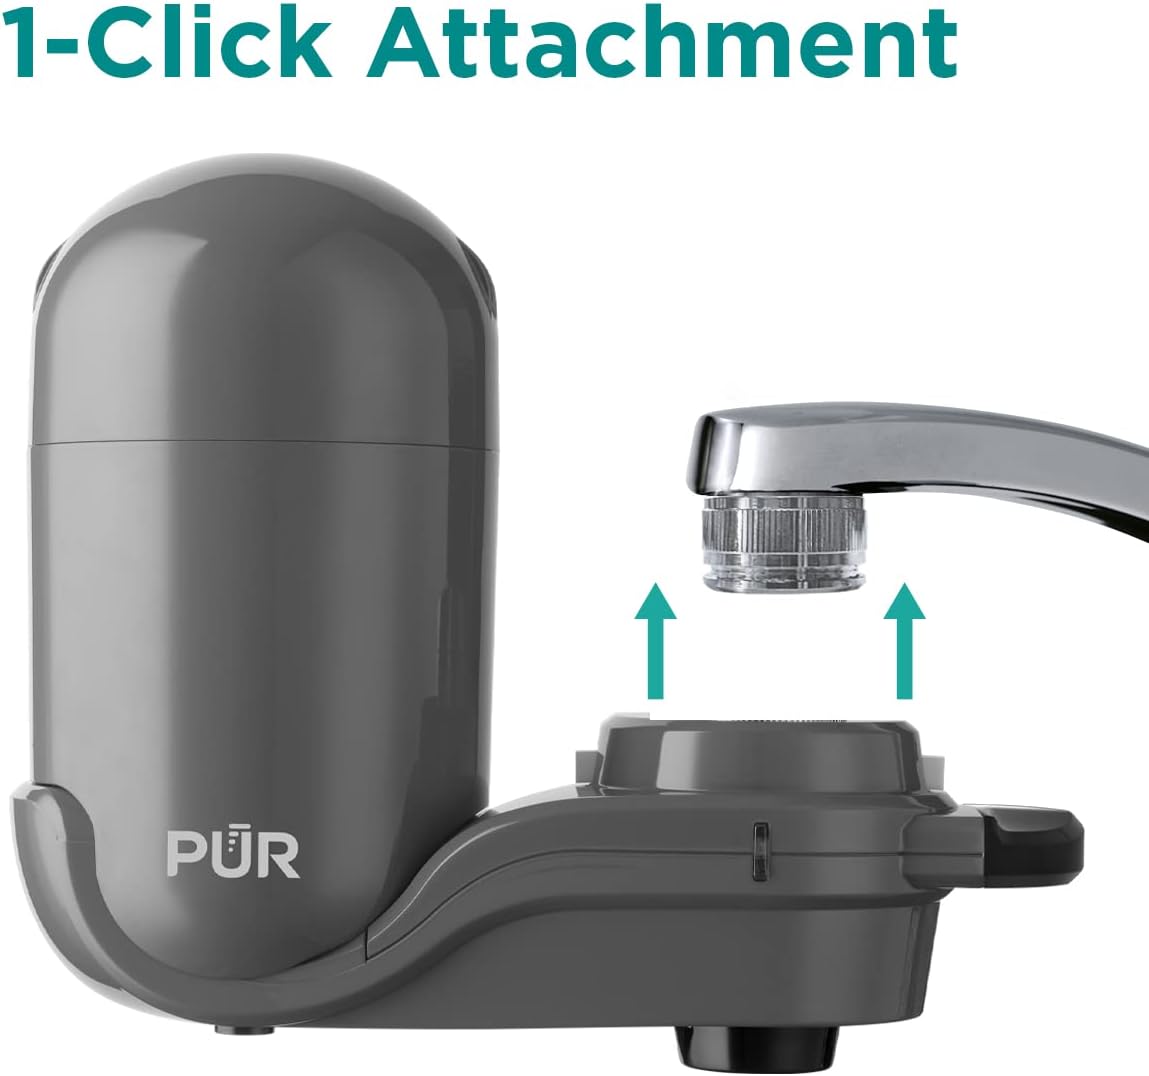 Plus Faucet Mount Water Filtration System, Gray – Vertical Faucet Mount for Crisp, Refreshing Water, FM2500V